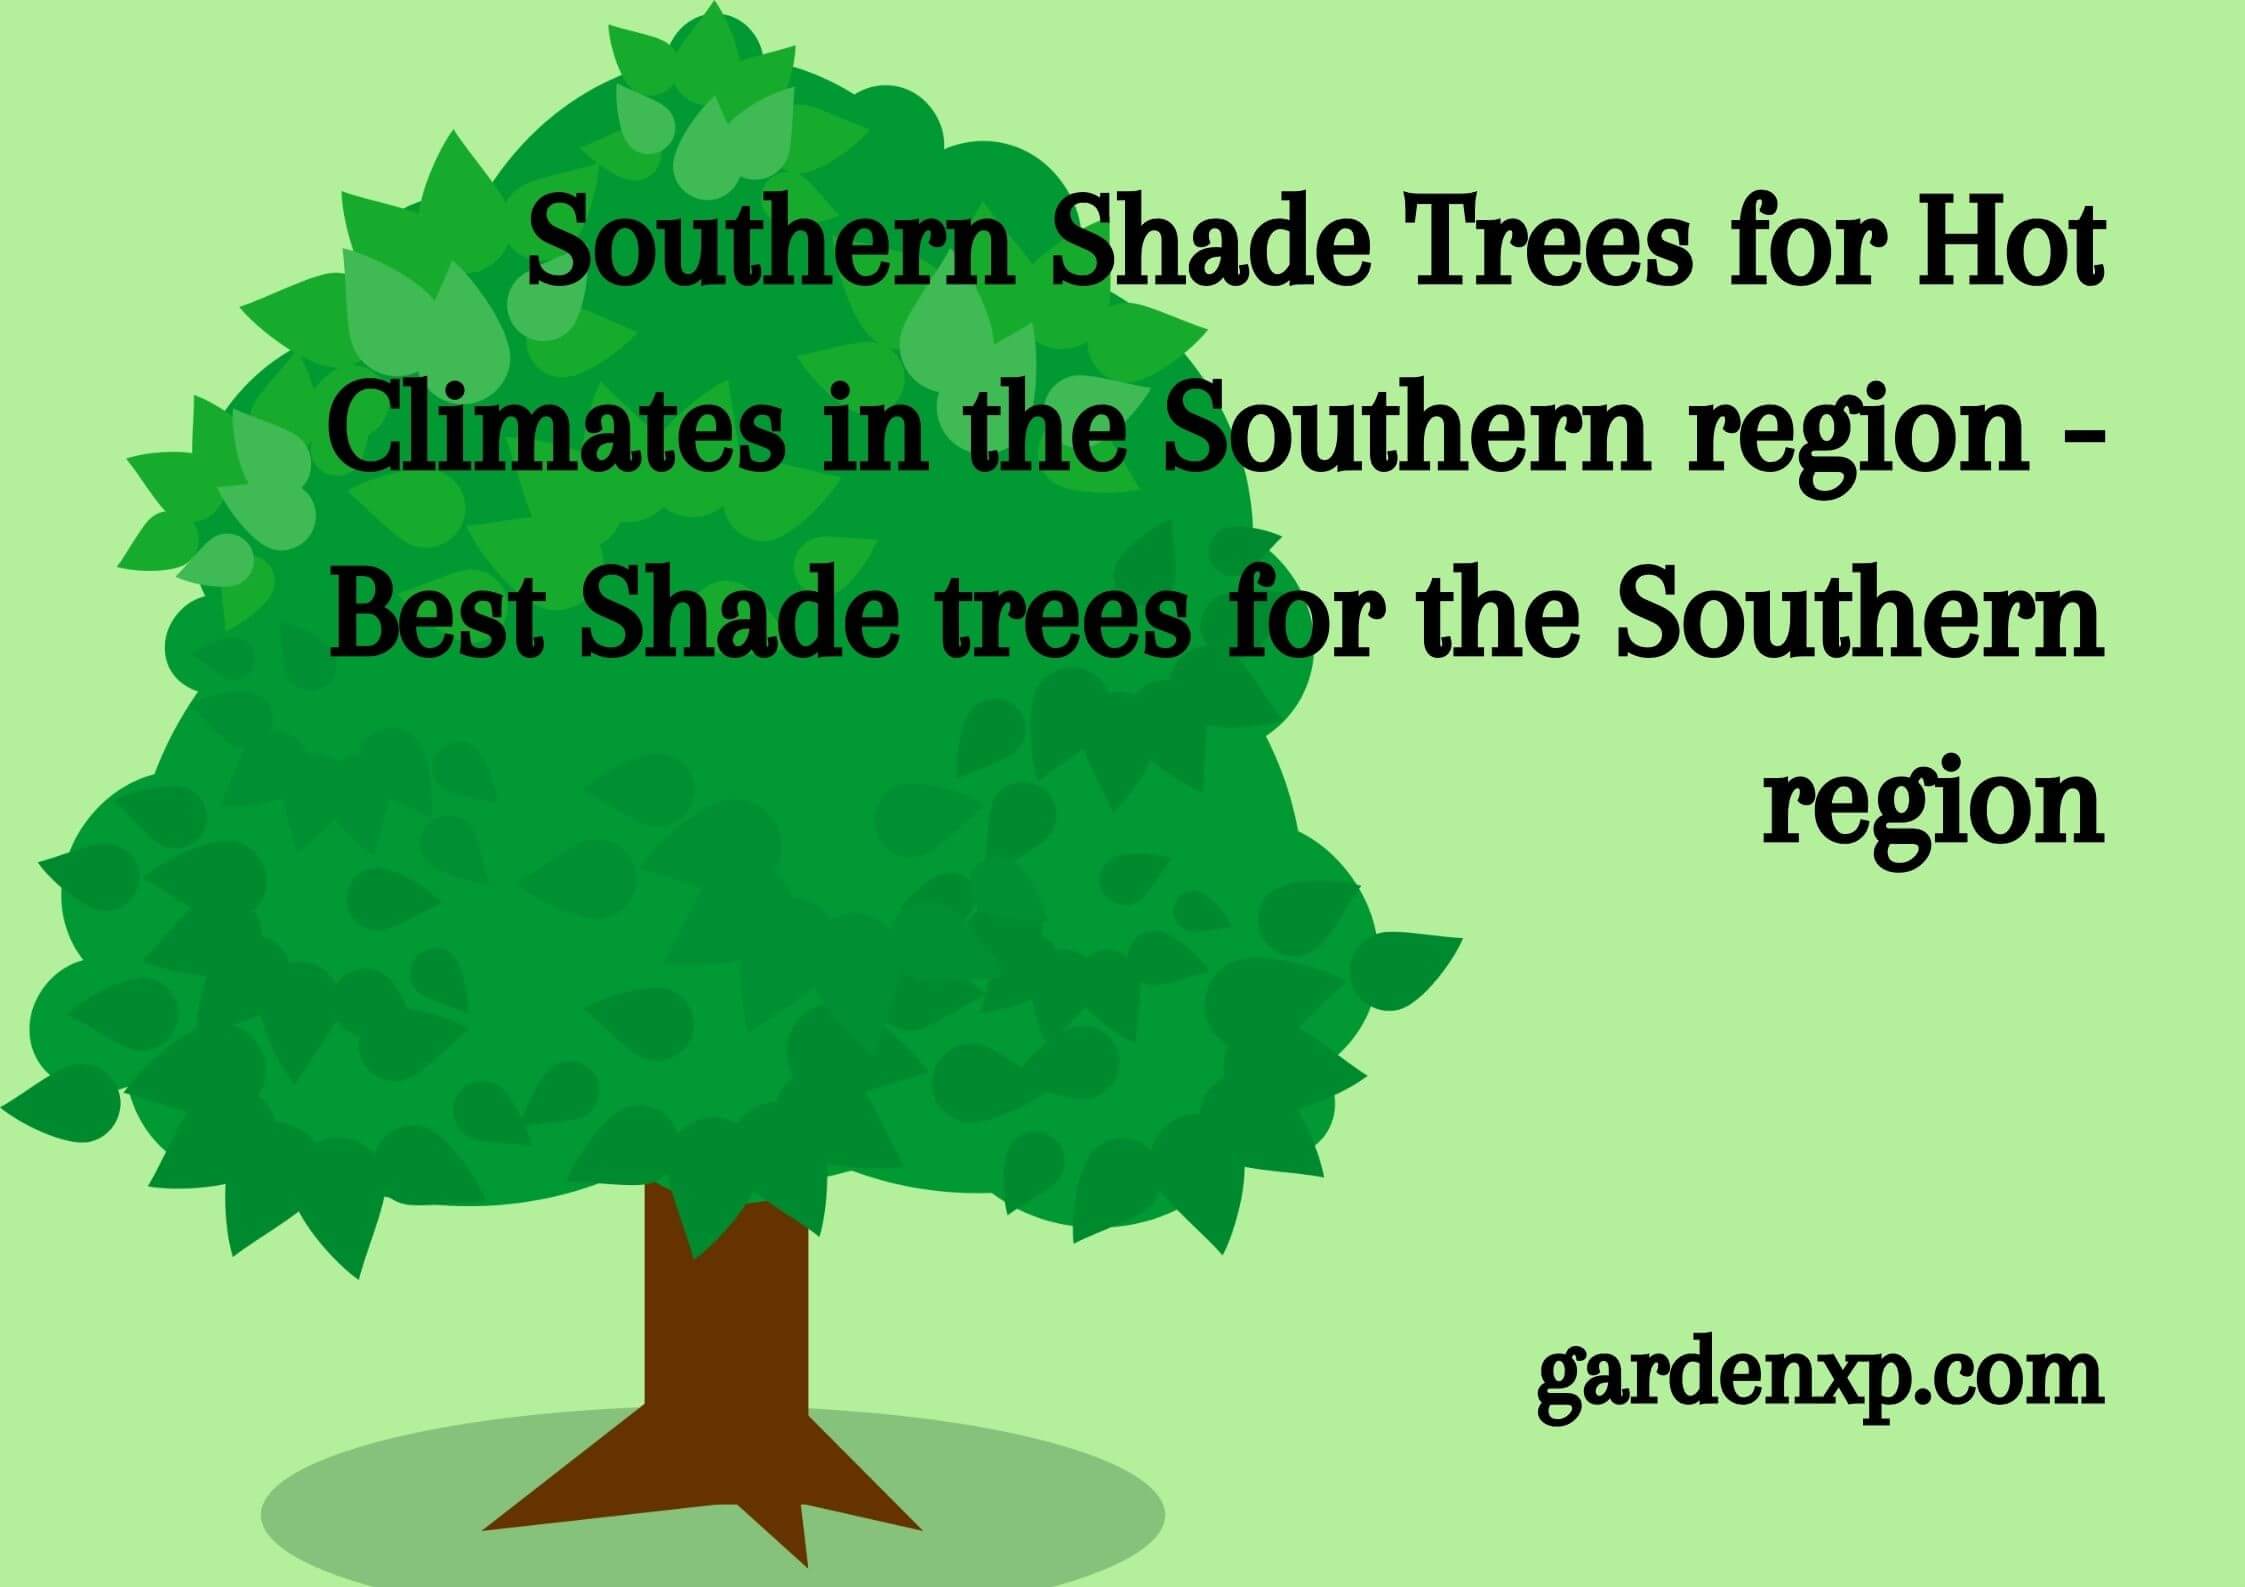 Southern Shade Trees for Hot Climates in the Southern region - Best Shade trees for the Southern region